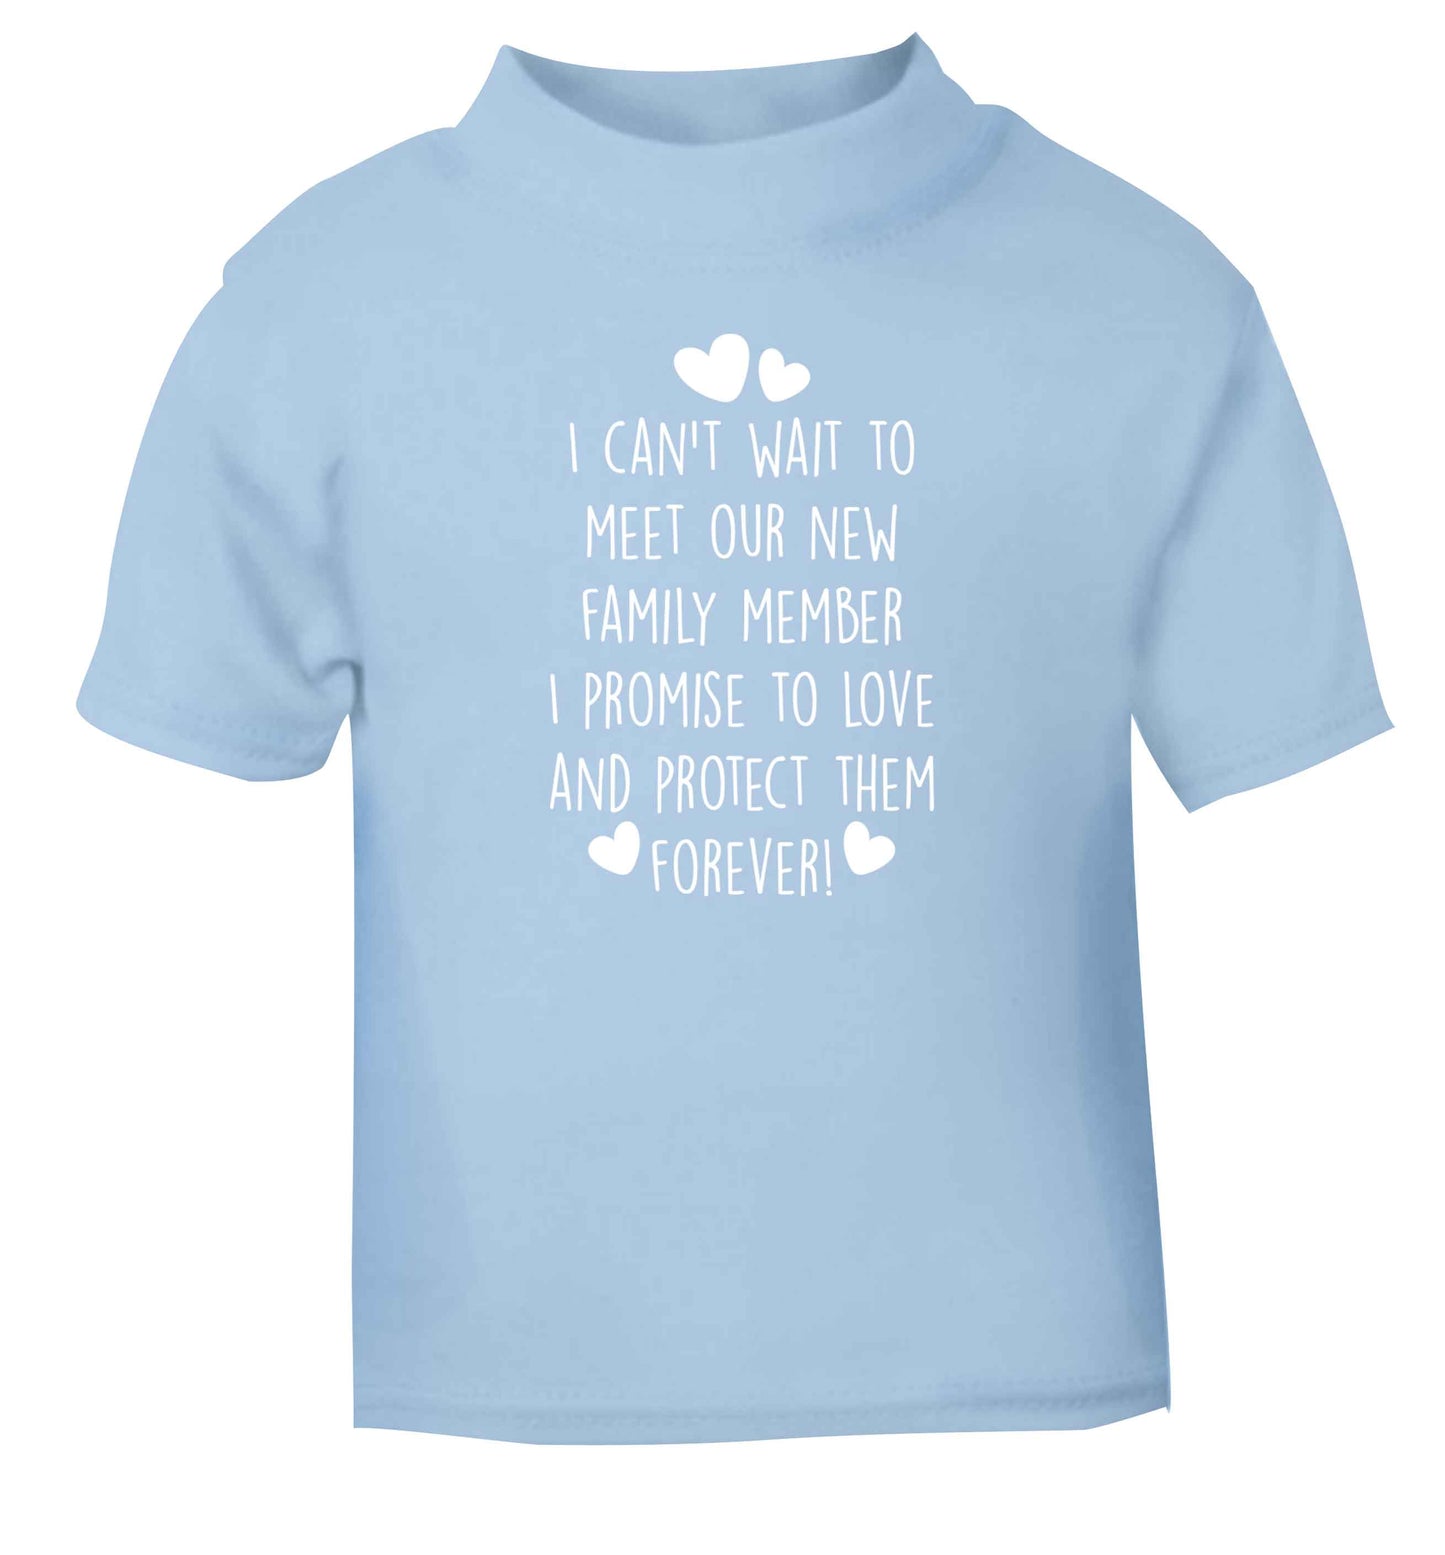 I can't wait to meet our new family member I promise to love and protect them foreverlight blue Baby Toddler Tshirt 2 Years